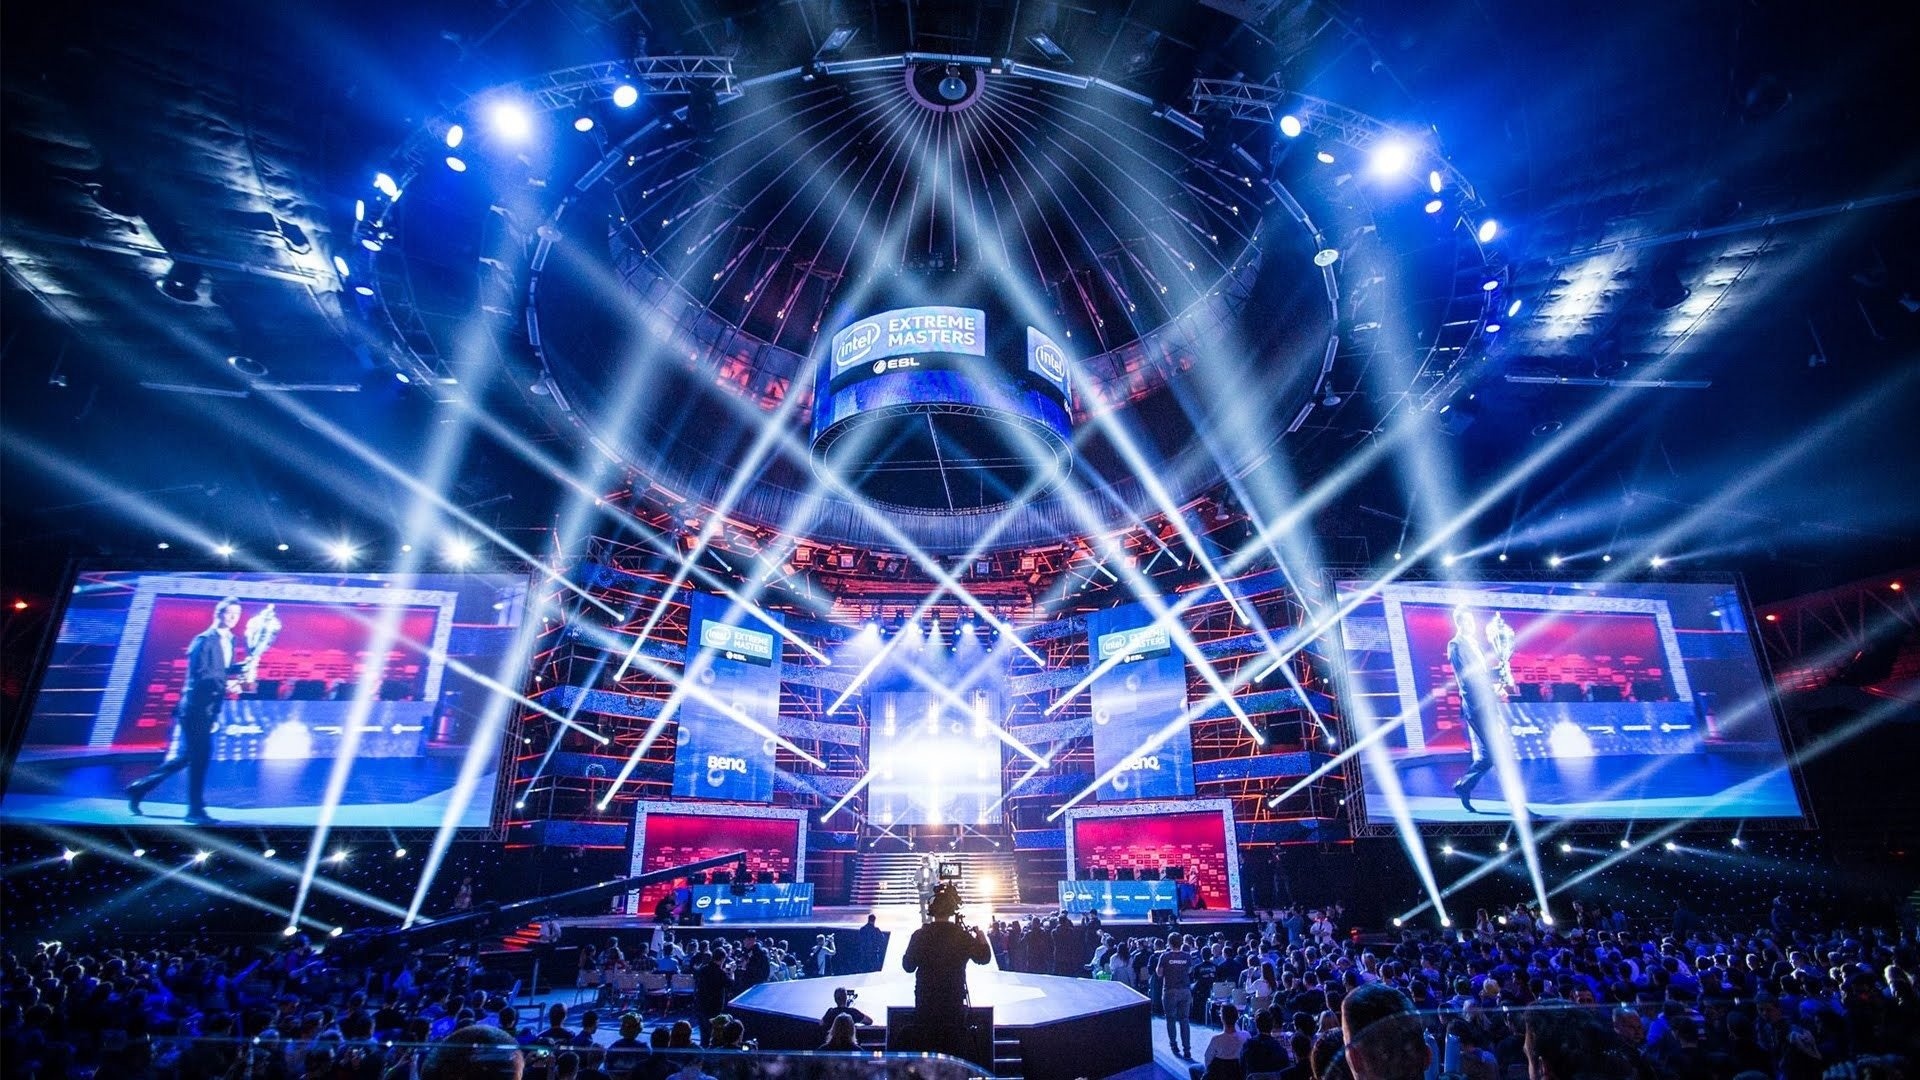 Esports: IEM Katowice Major 2019, Intel Extreme Masters Counter-Strike: Global Offensive Championship. 1920x1080 Full HD Background.